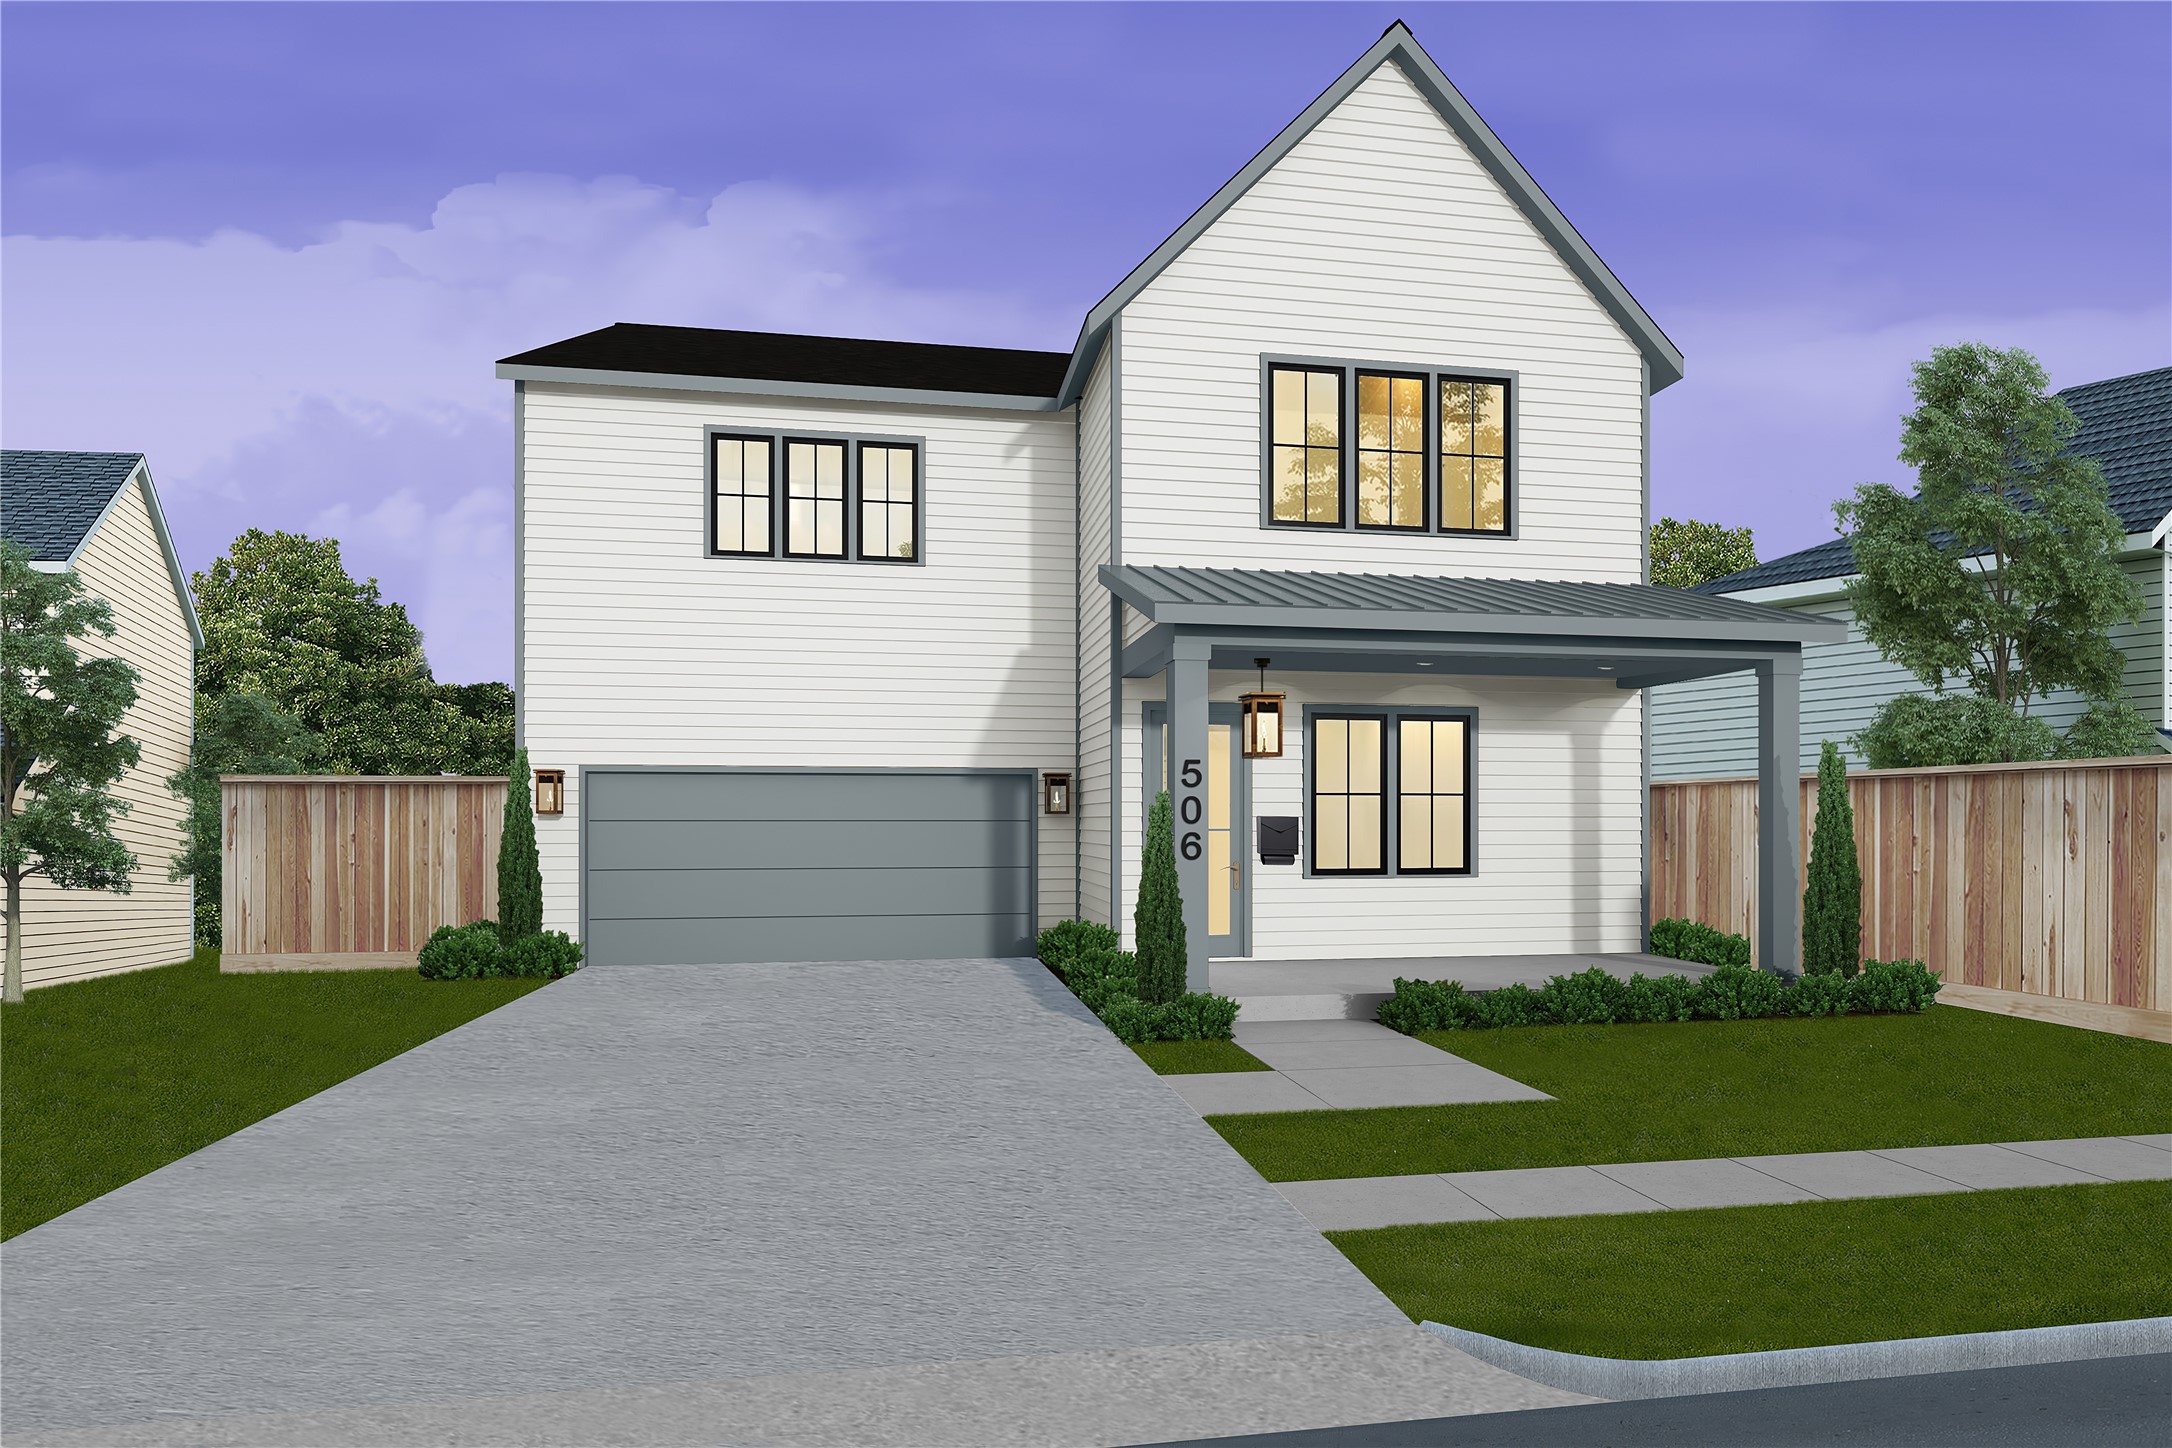 Welcome to your new home! (Proposed front exterior)